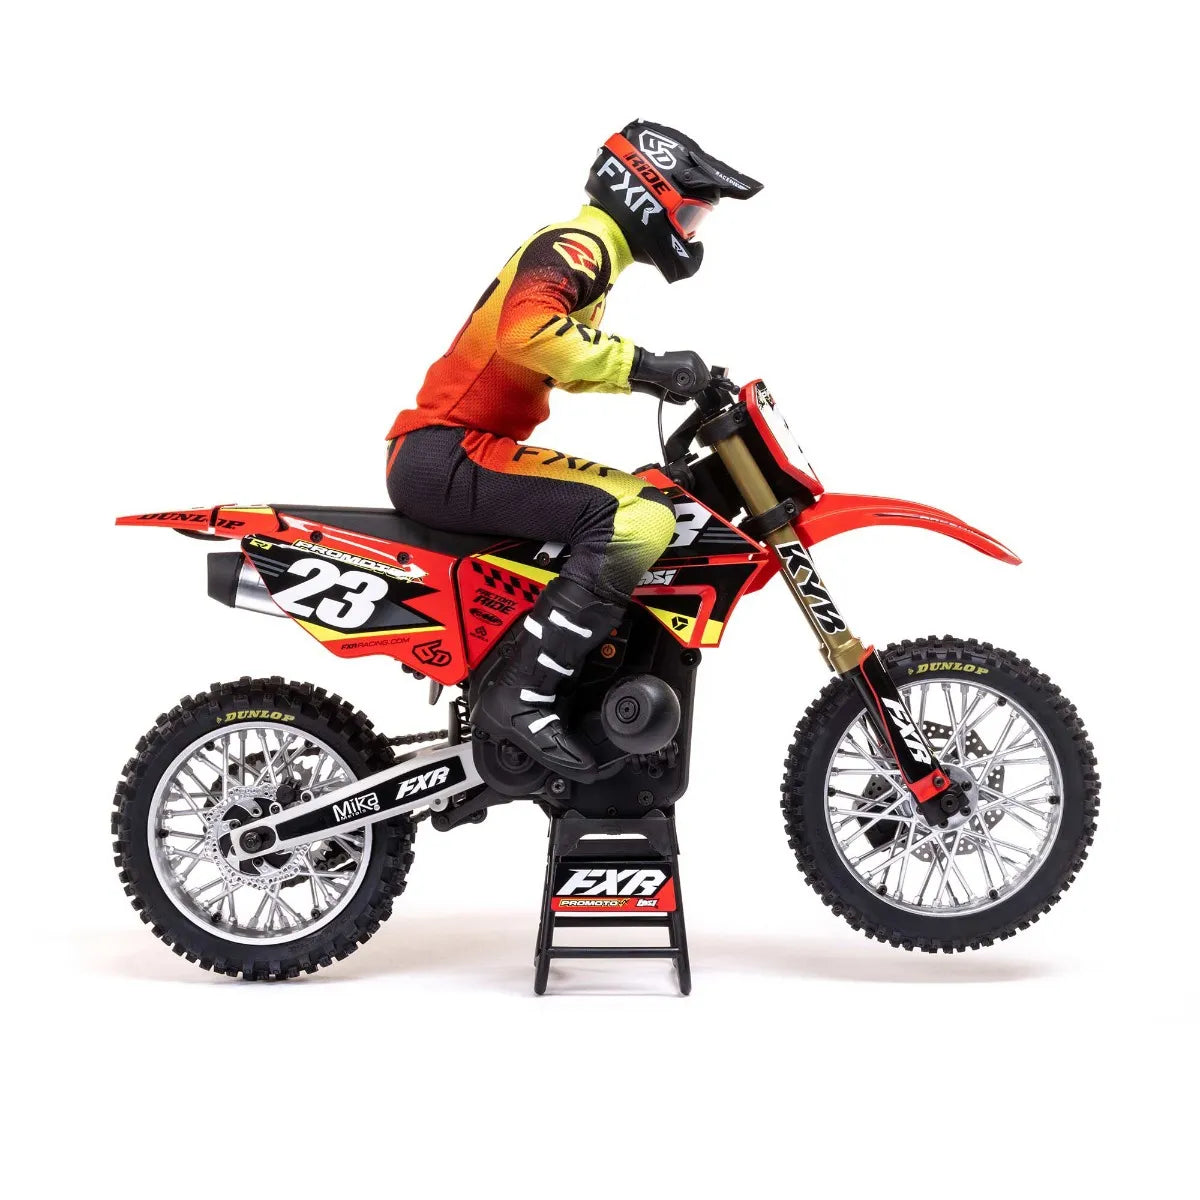 Detailed RC motorcycle with rider in full gear, featuring a sleek red and yellow design.